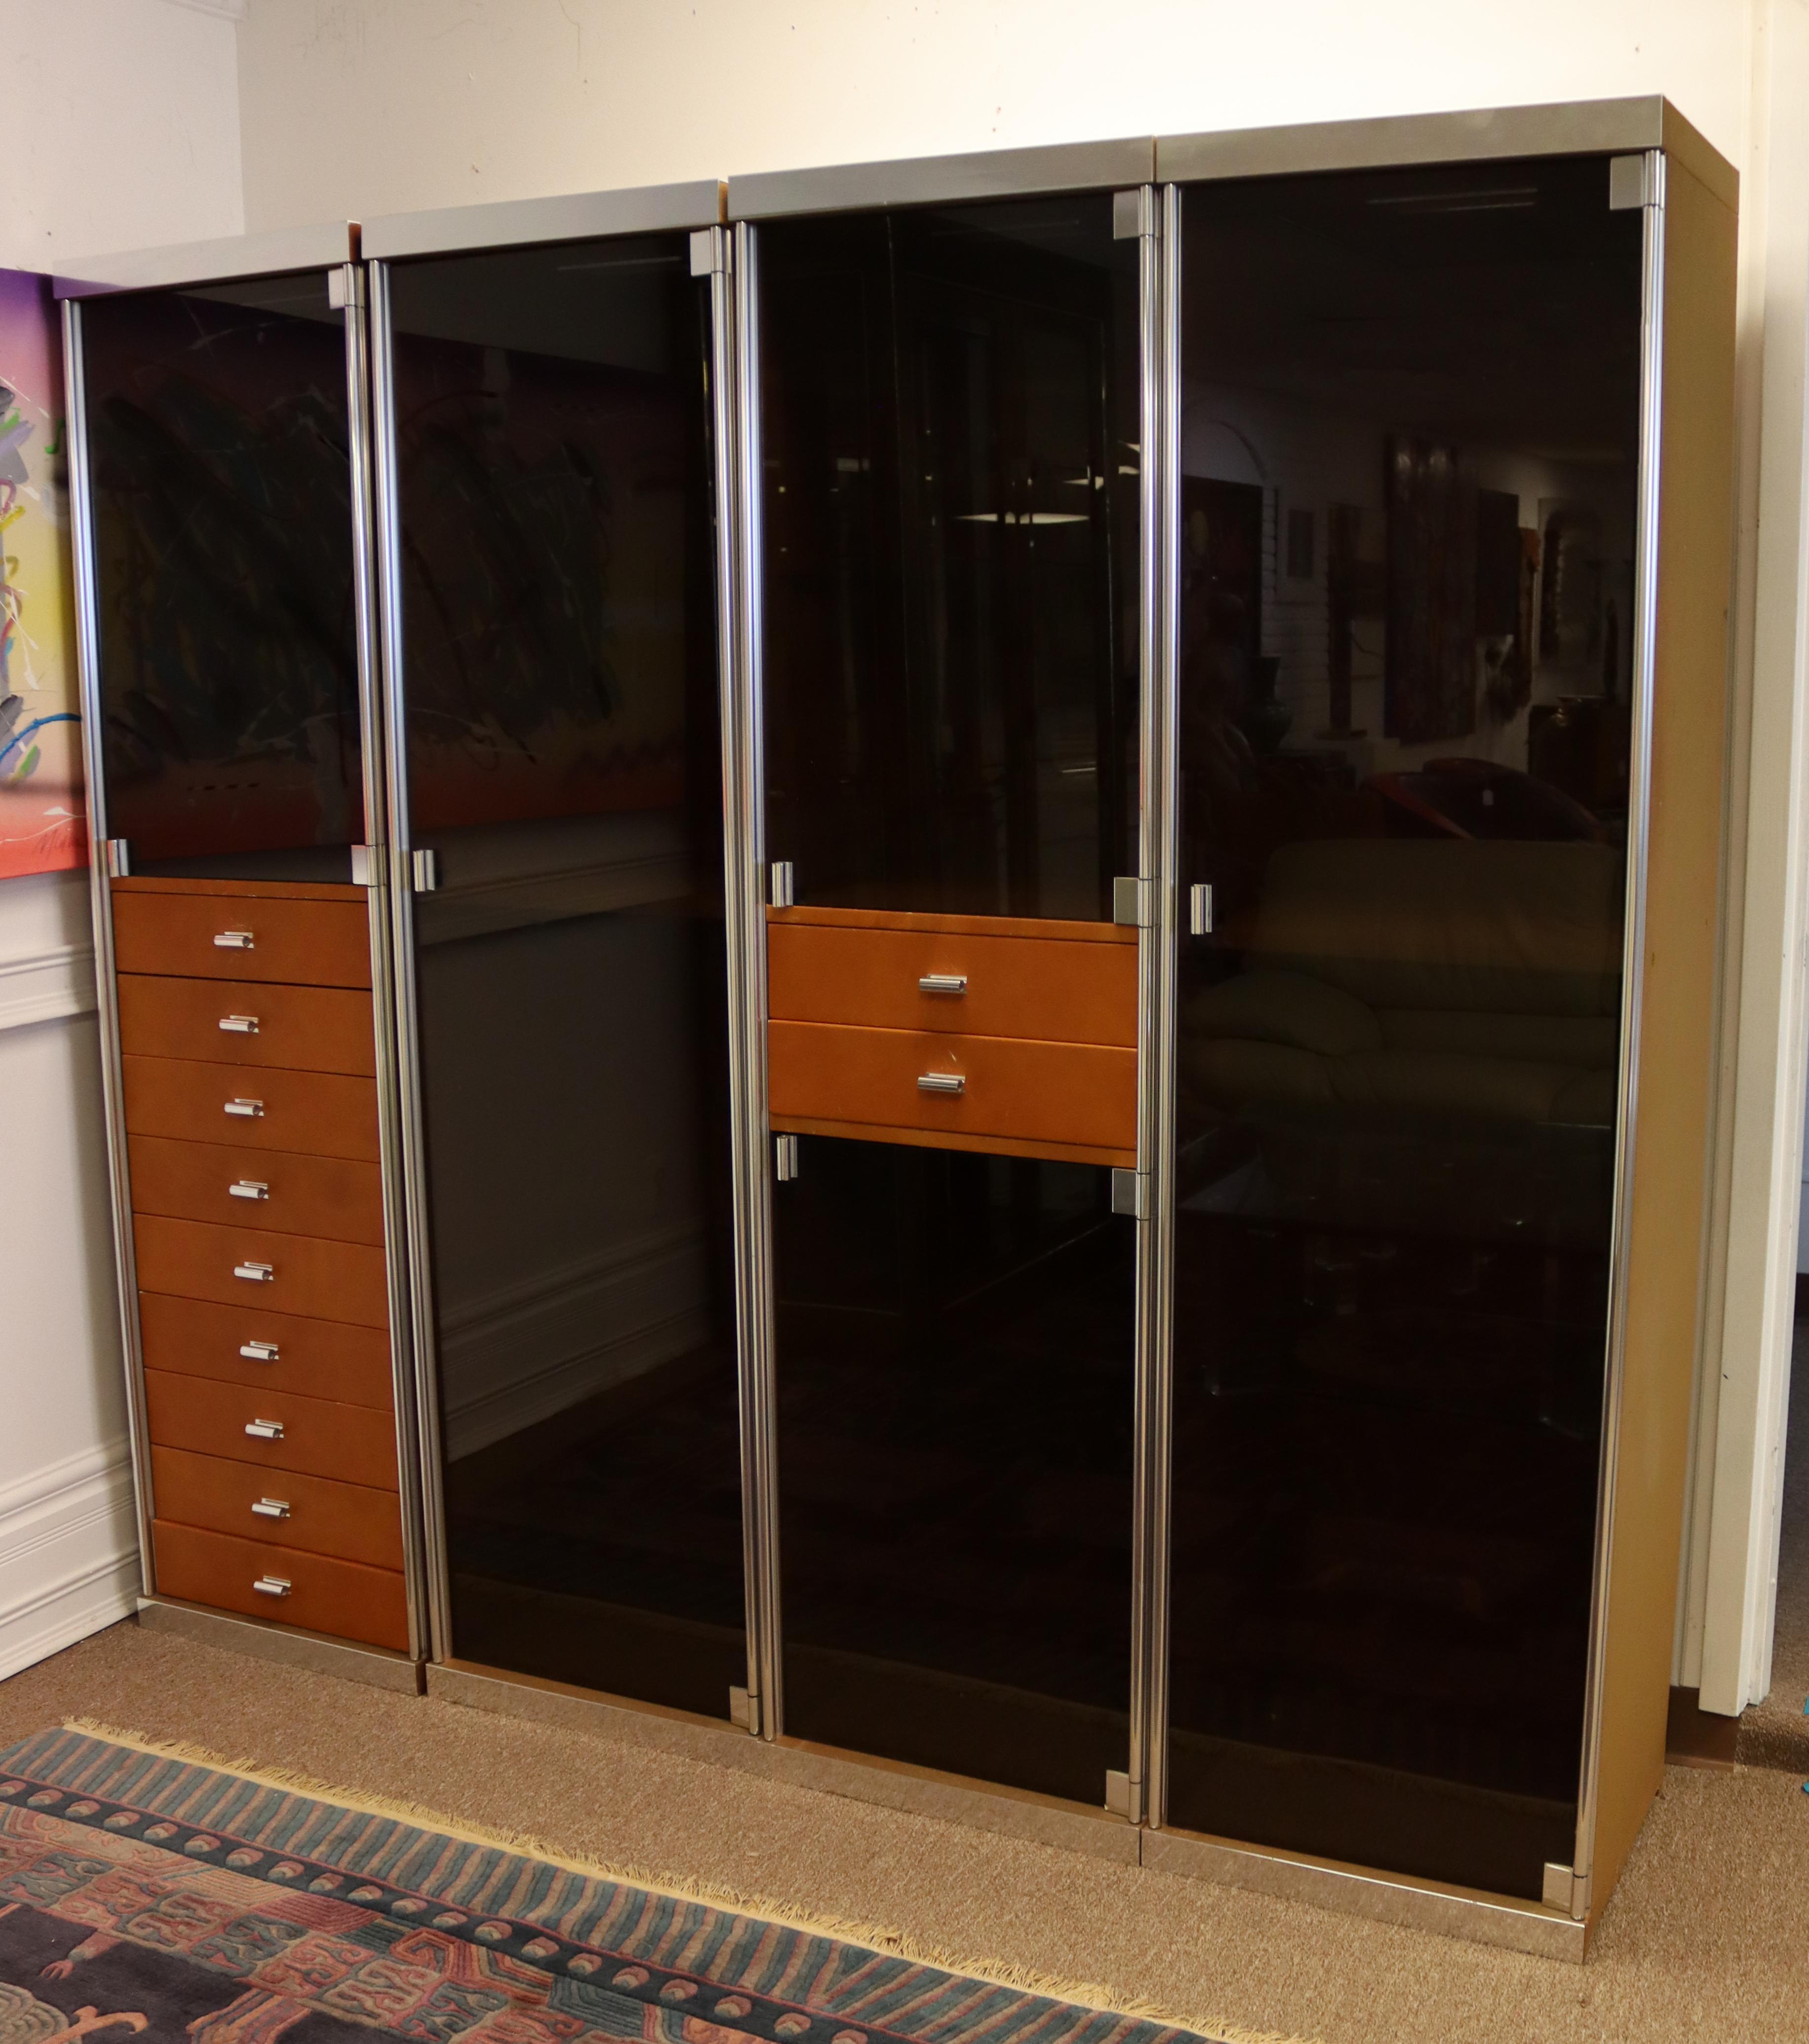 For your consideration is a stupendous set of four cabinets or wardrobes, with smoked glass doors and chrome and leather accents, by Guido Faleschini for Pace, circa the 1970s. In very good vintage condition. The dimensions of each are 20